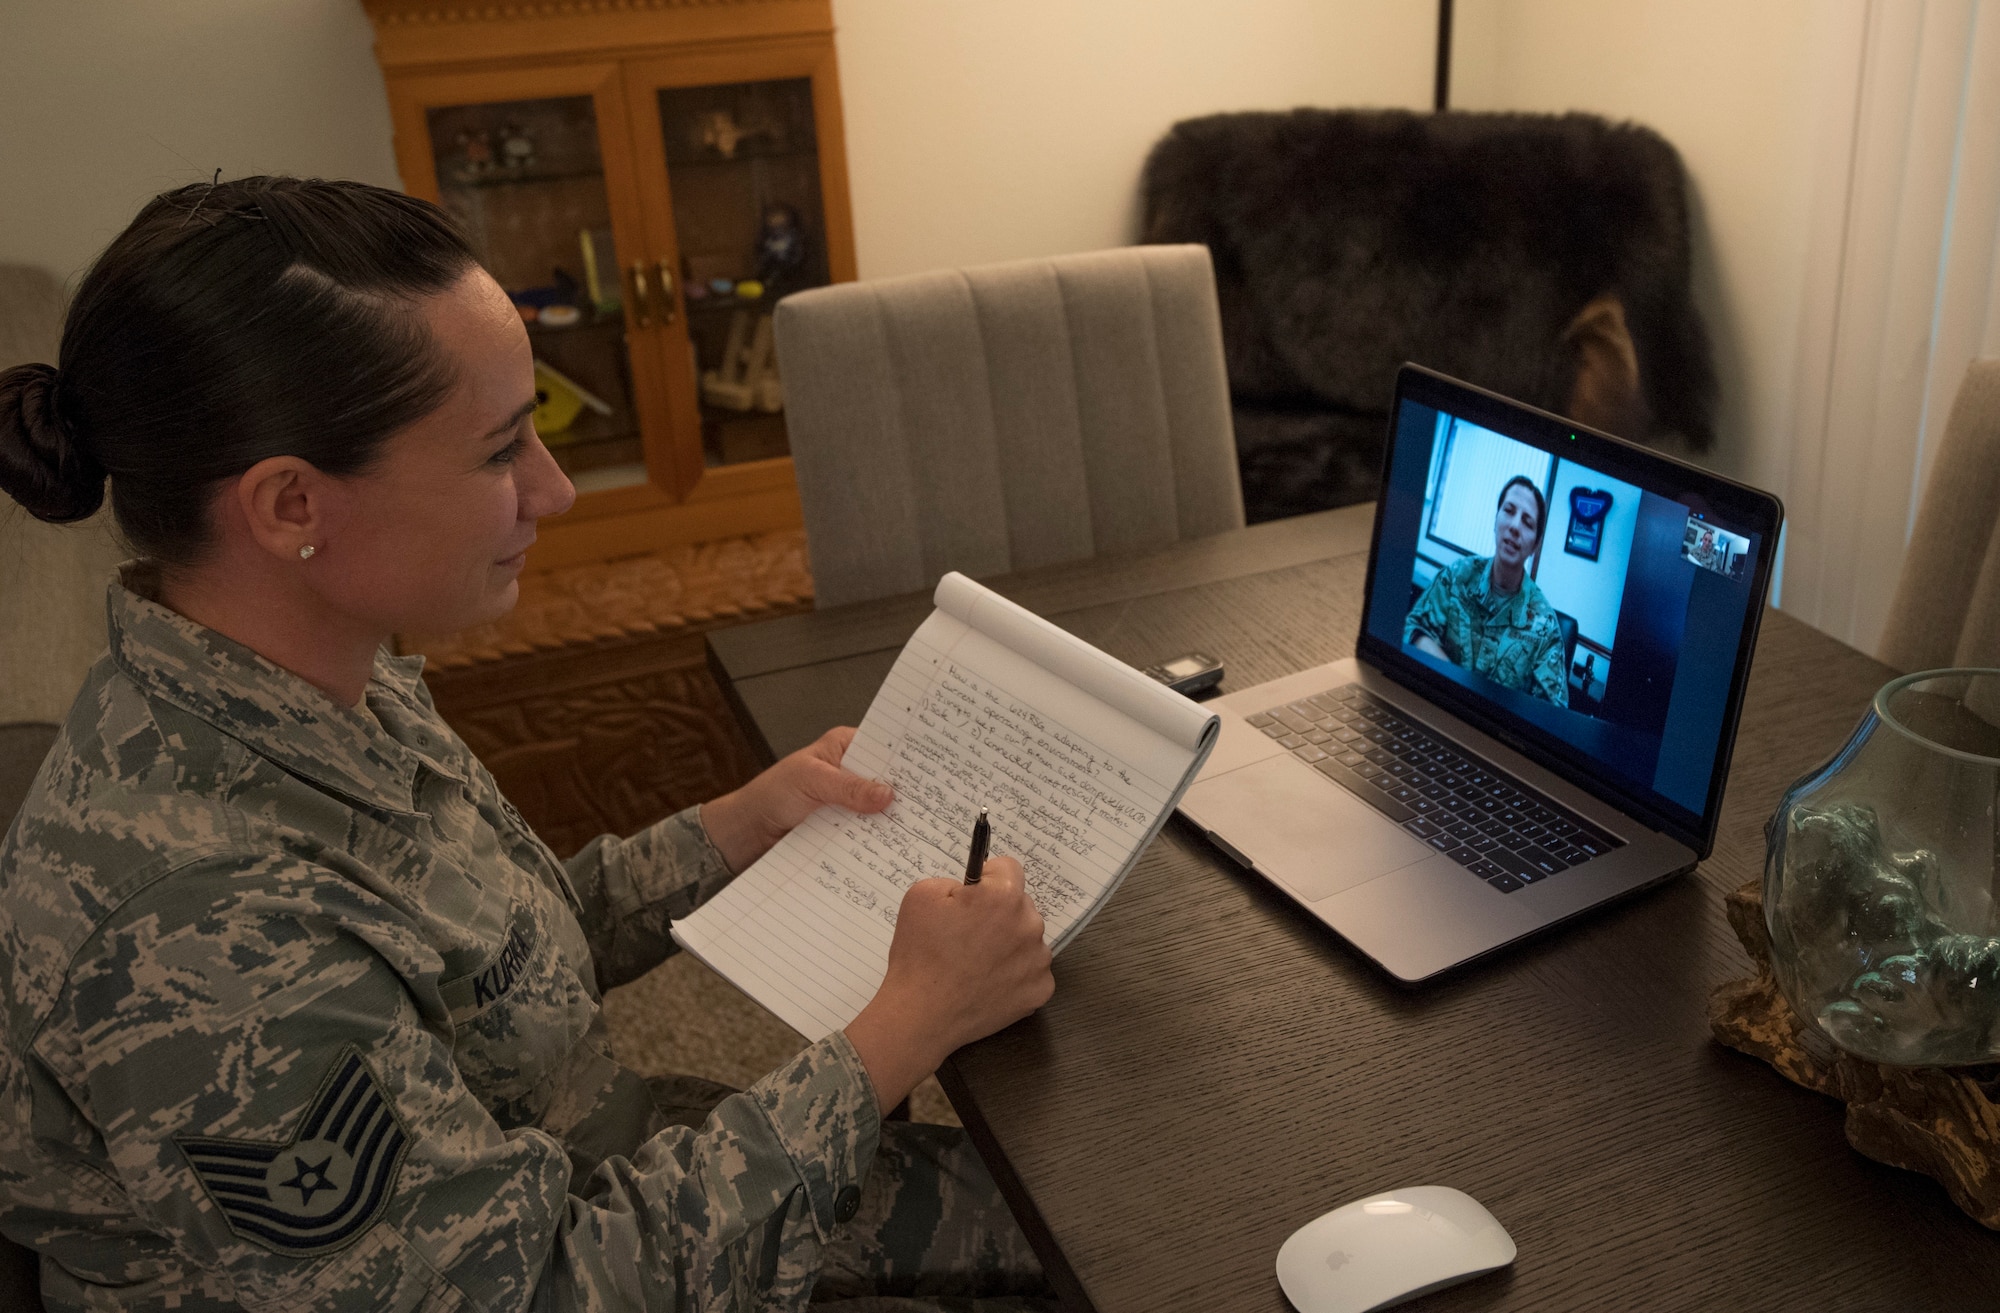 Tech. Sgt. Amber Kurka, 624th Public Affairs photojournalist craftsman, speaks with Col. Athanasia Shinas, 624th Regional Support Group commander, during a virtual interview from her home in Mililani, Hawaii. (Christopher Kurka)